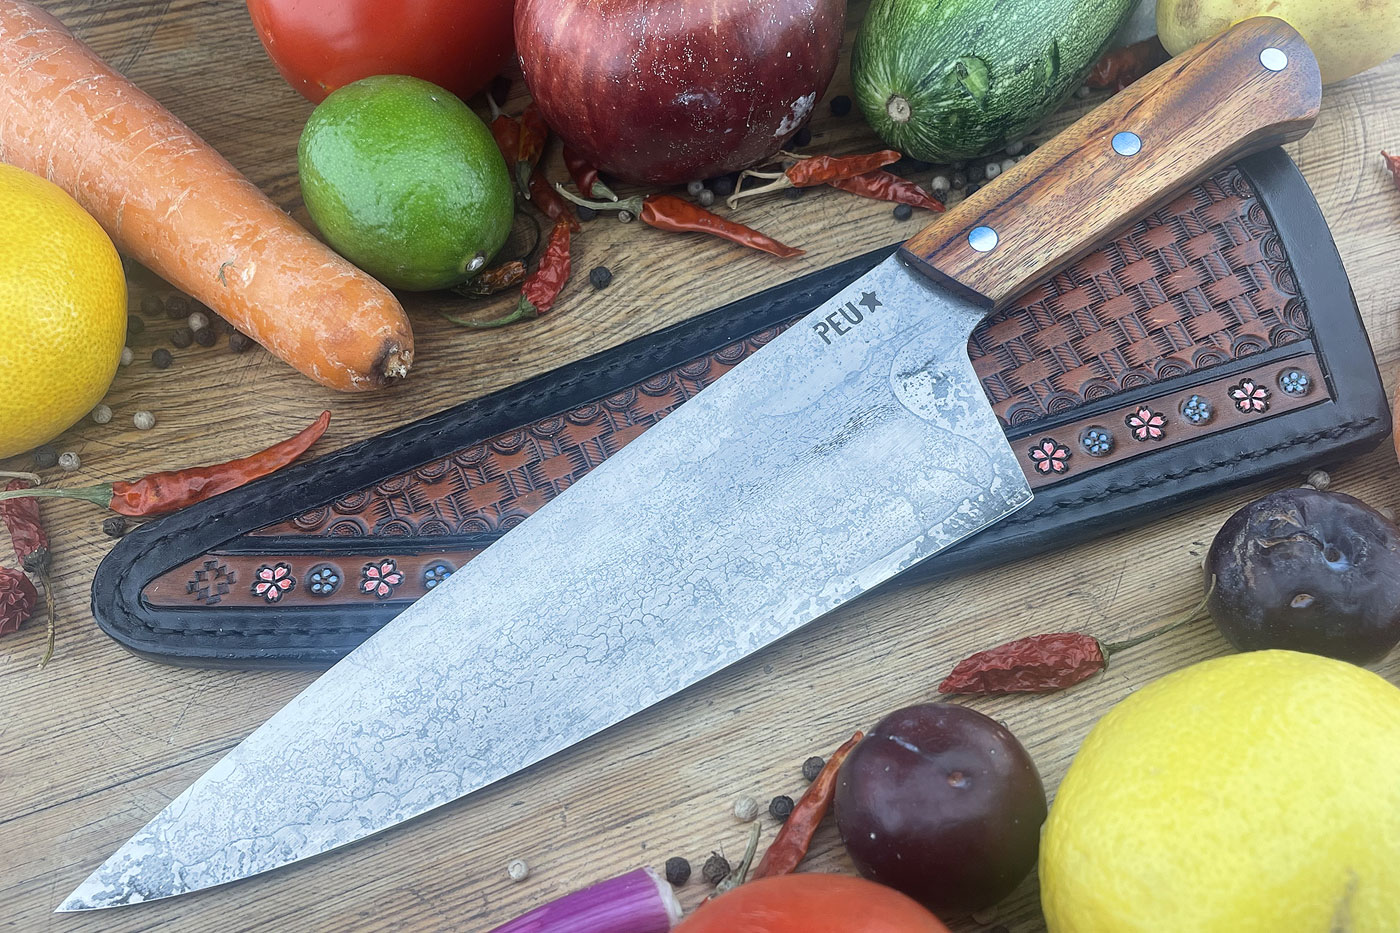 Chef's Knife (Cocinero 210mm) with Urunday and O2 Carbon Steel